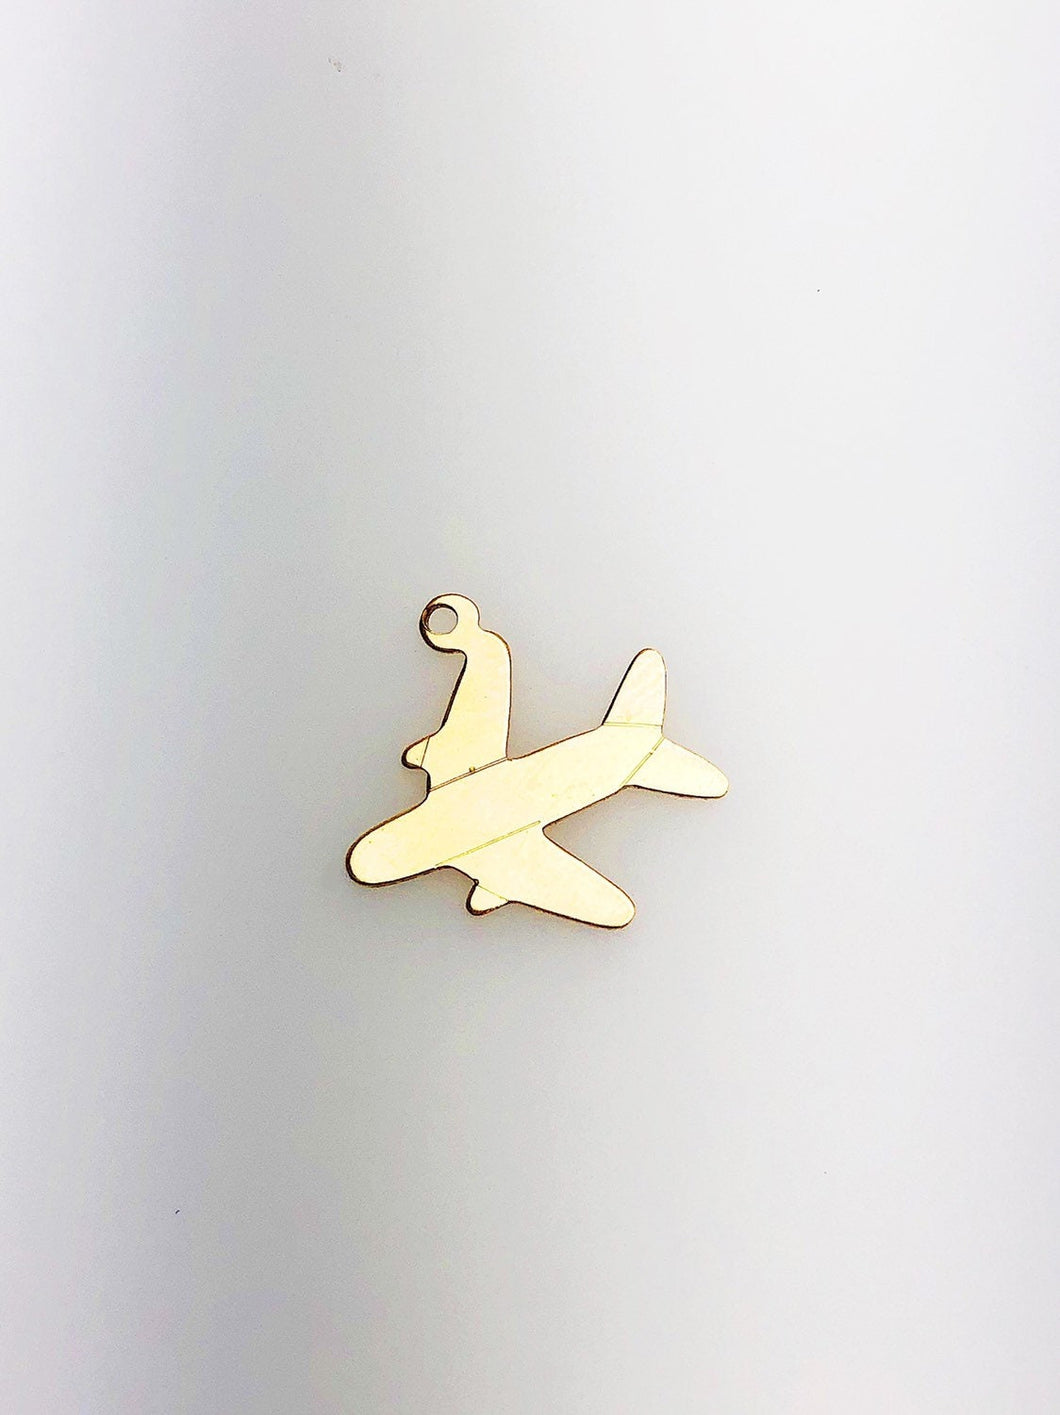 14K Gold Fill Airplane Charm w/ Ring, 14.2x14.6mm, Made in USA - 420